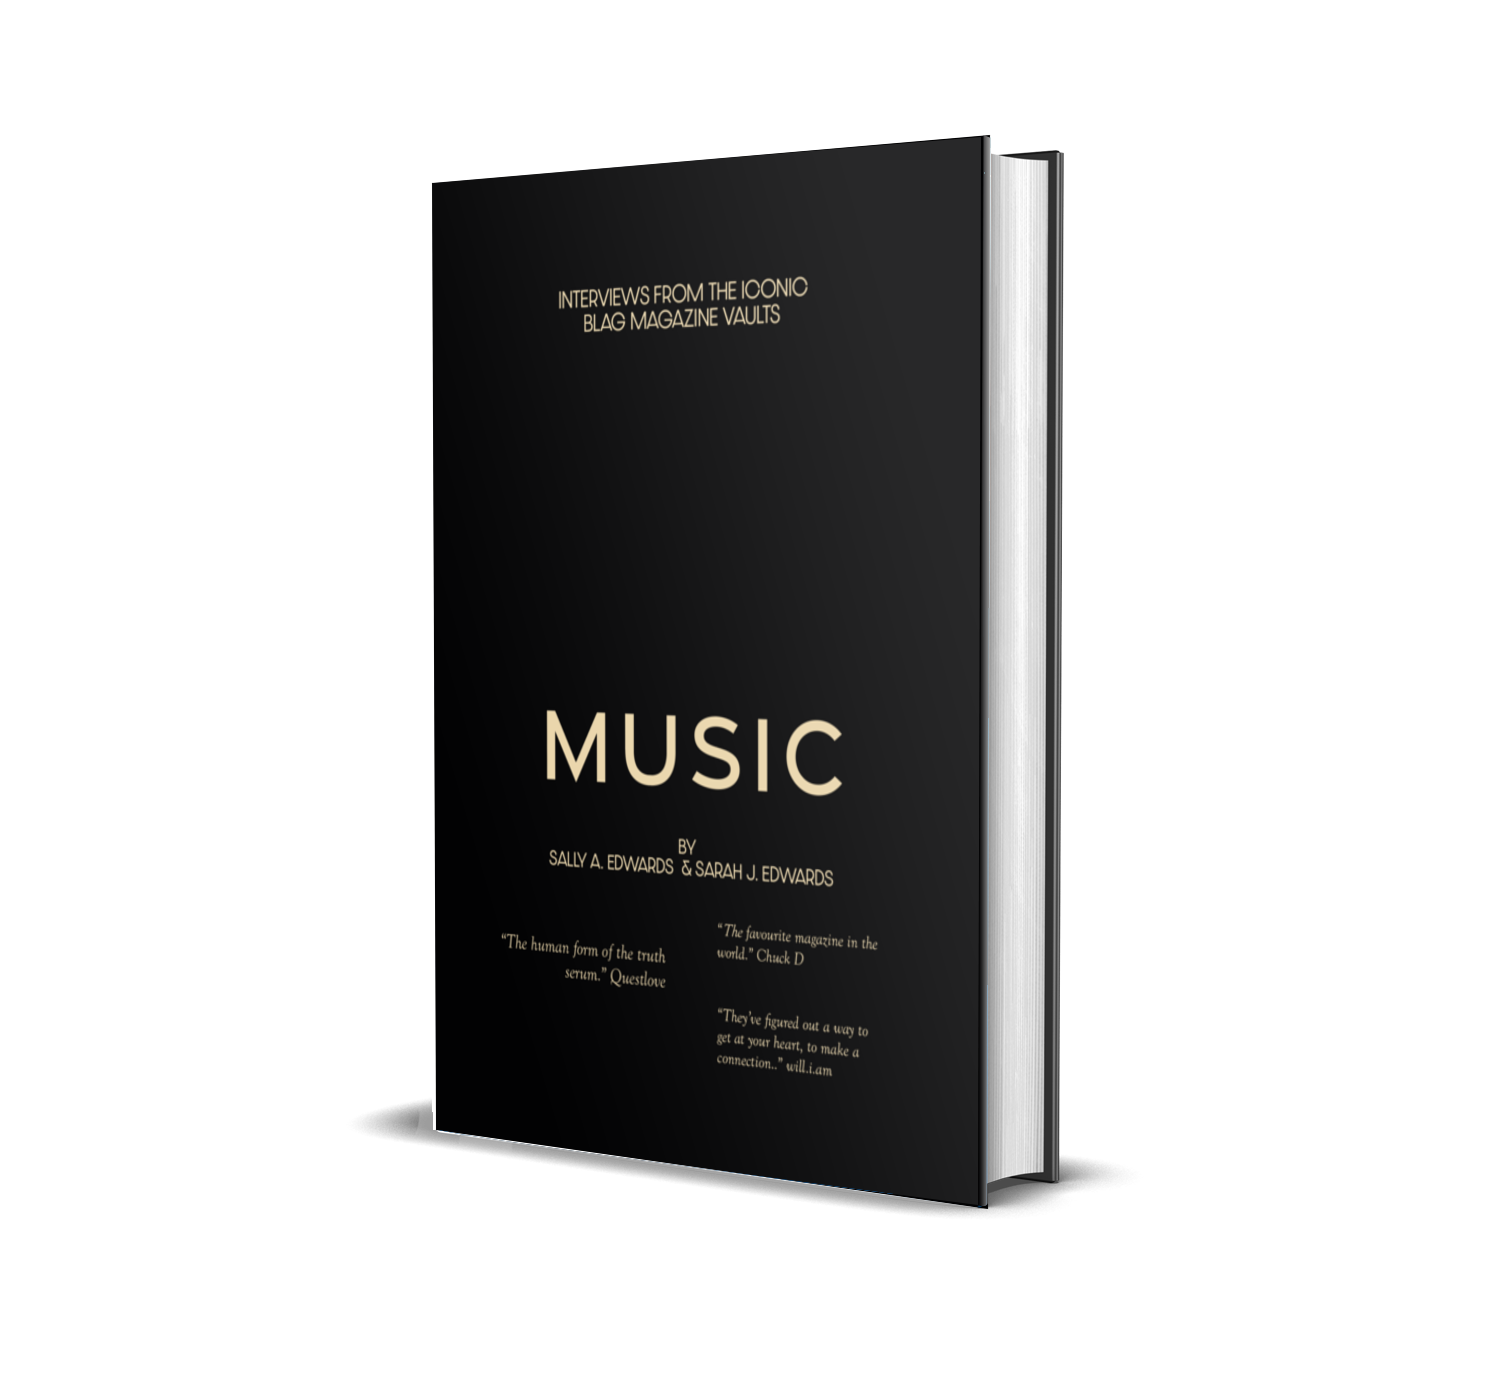 MUSIC Book by BLAG Magazine First Edition